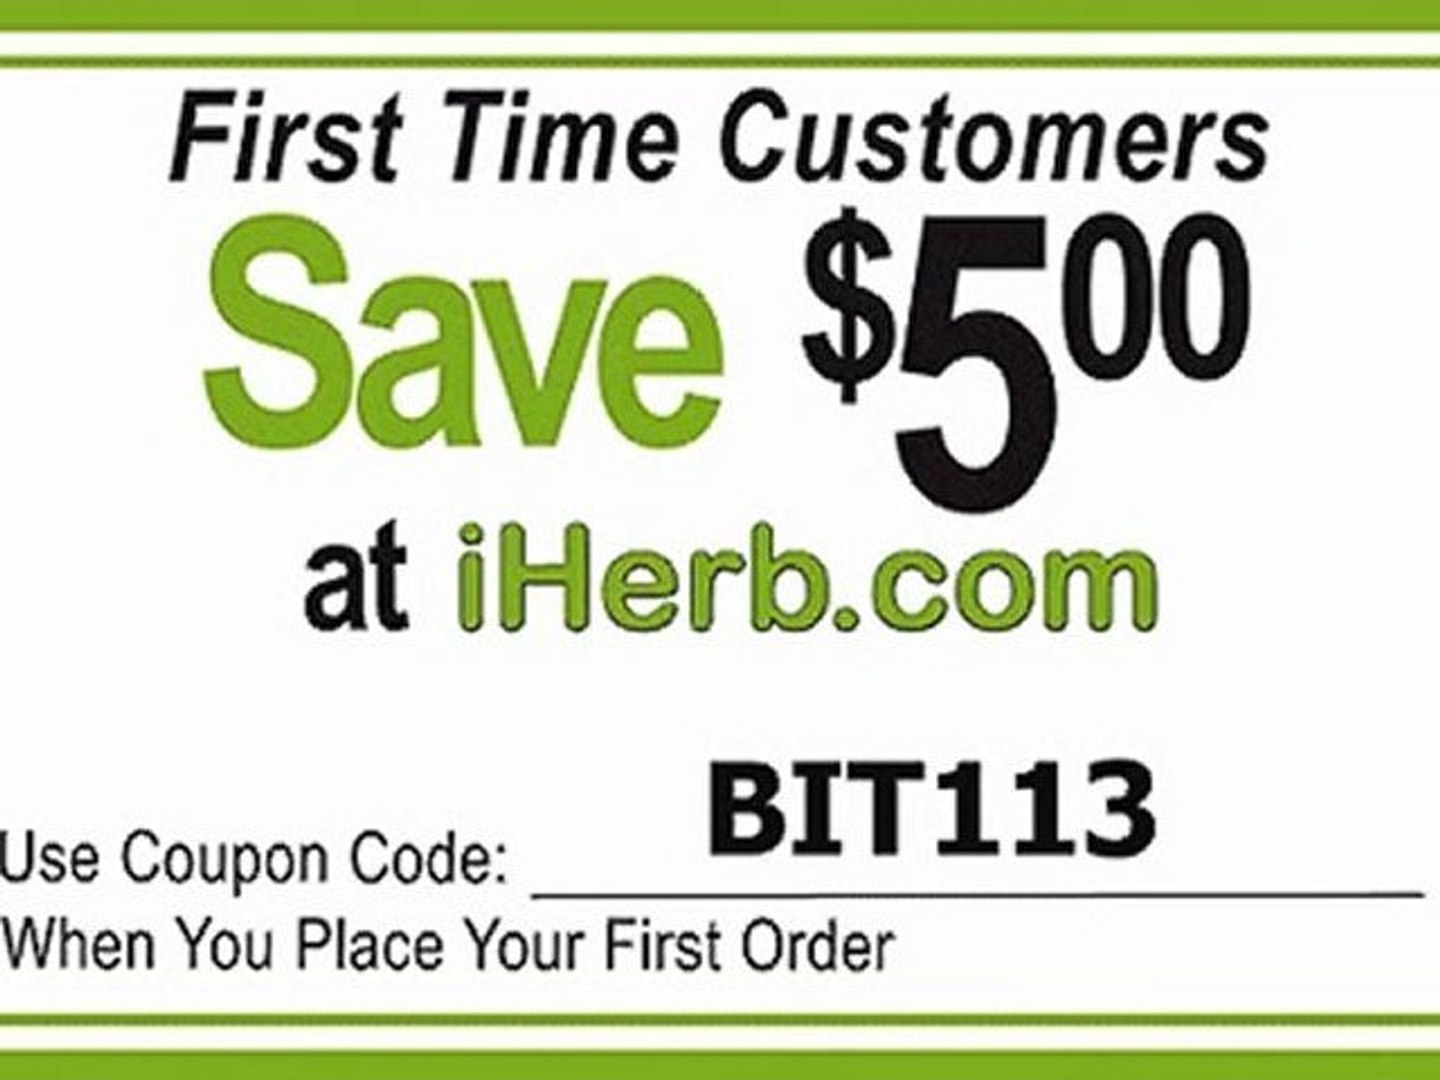 Coupon one bite. One time customer. Iherb coupon vk com